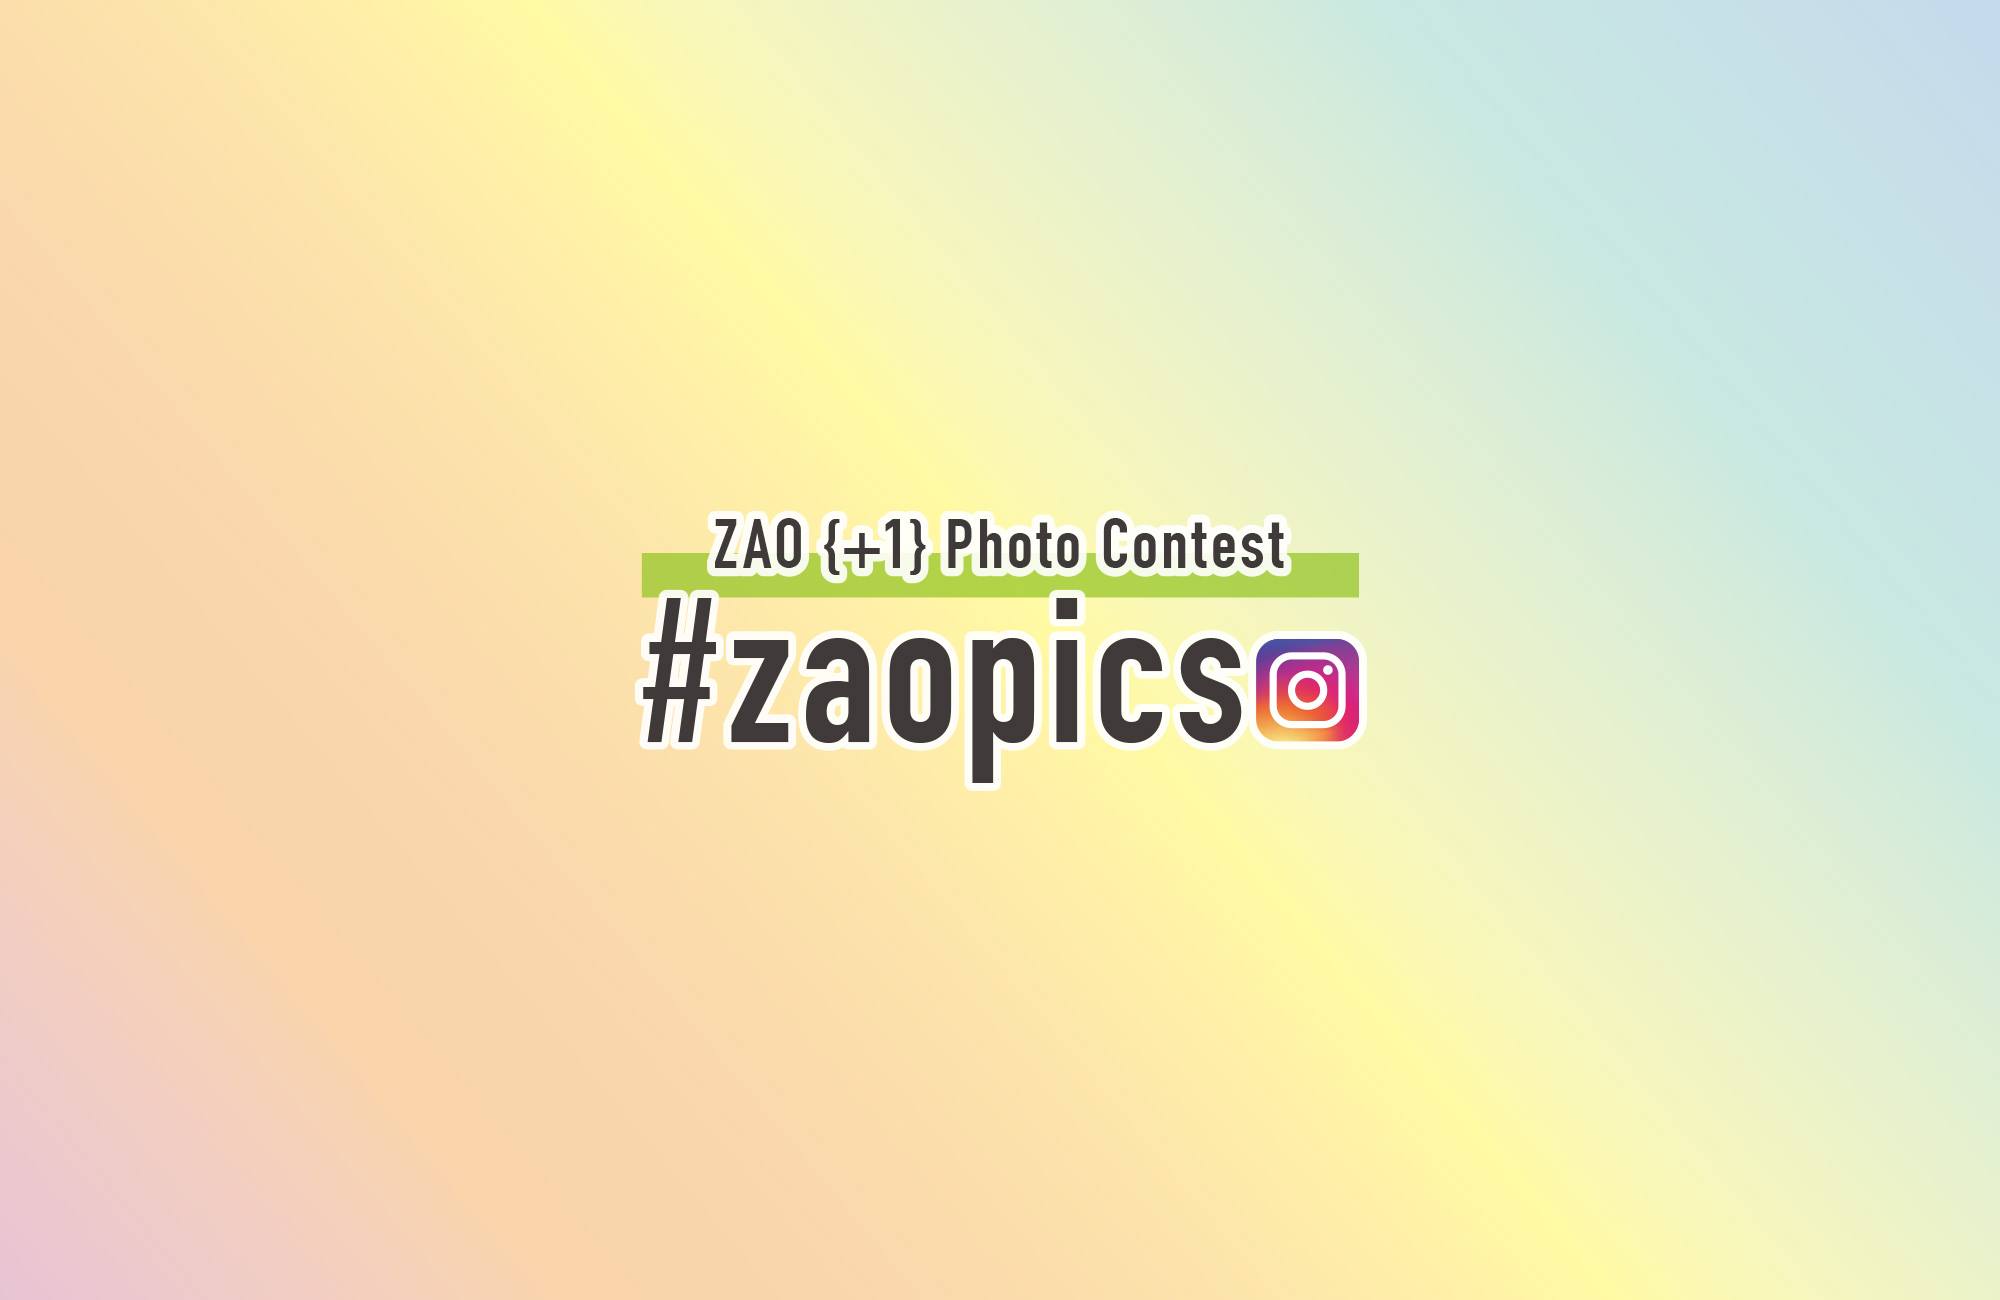 Let’s visit more than 2 places in the ZAO area and post on Instagram!